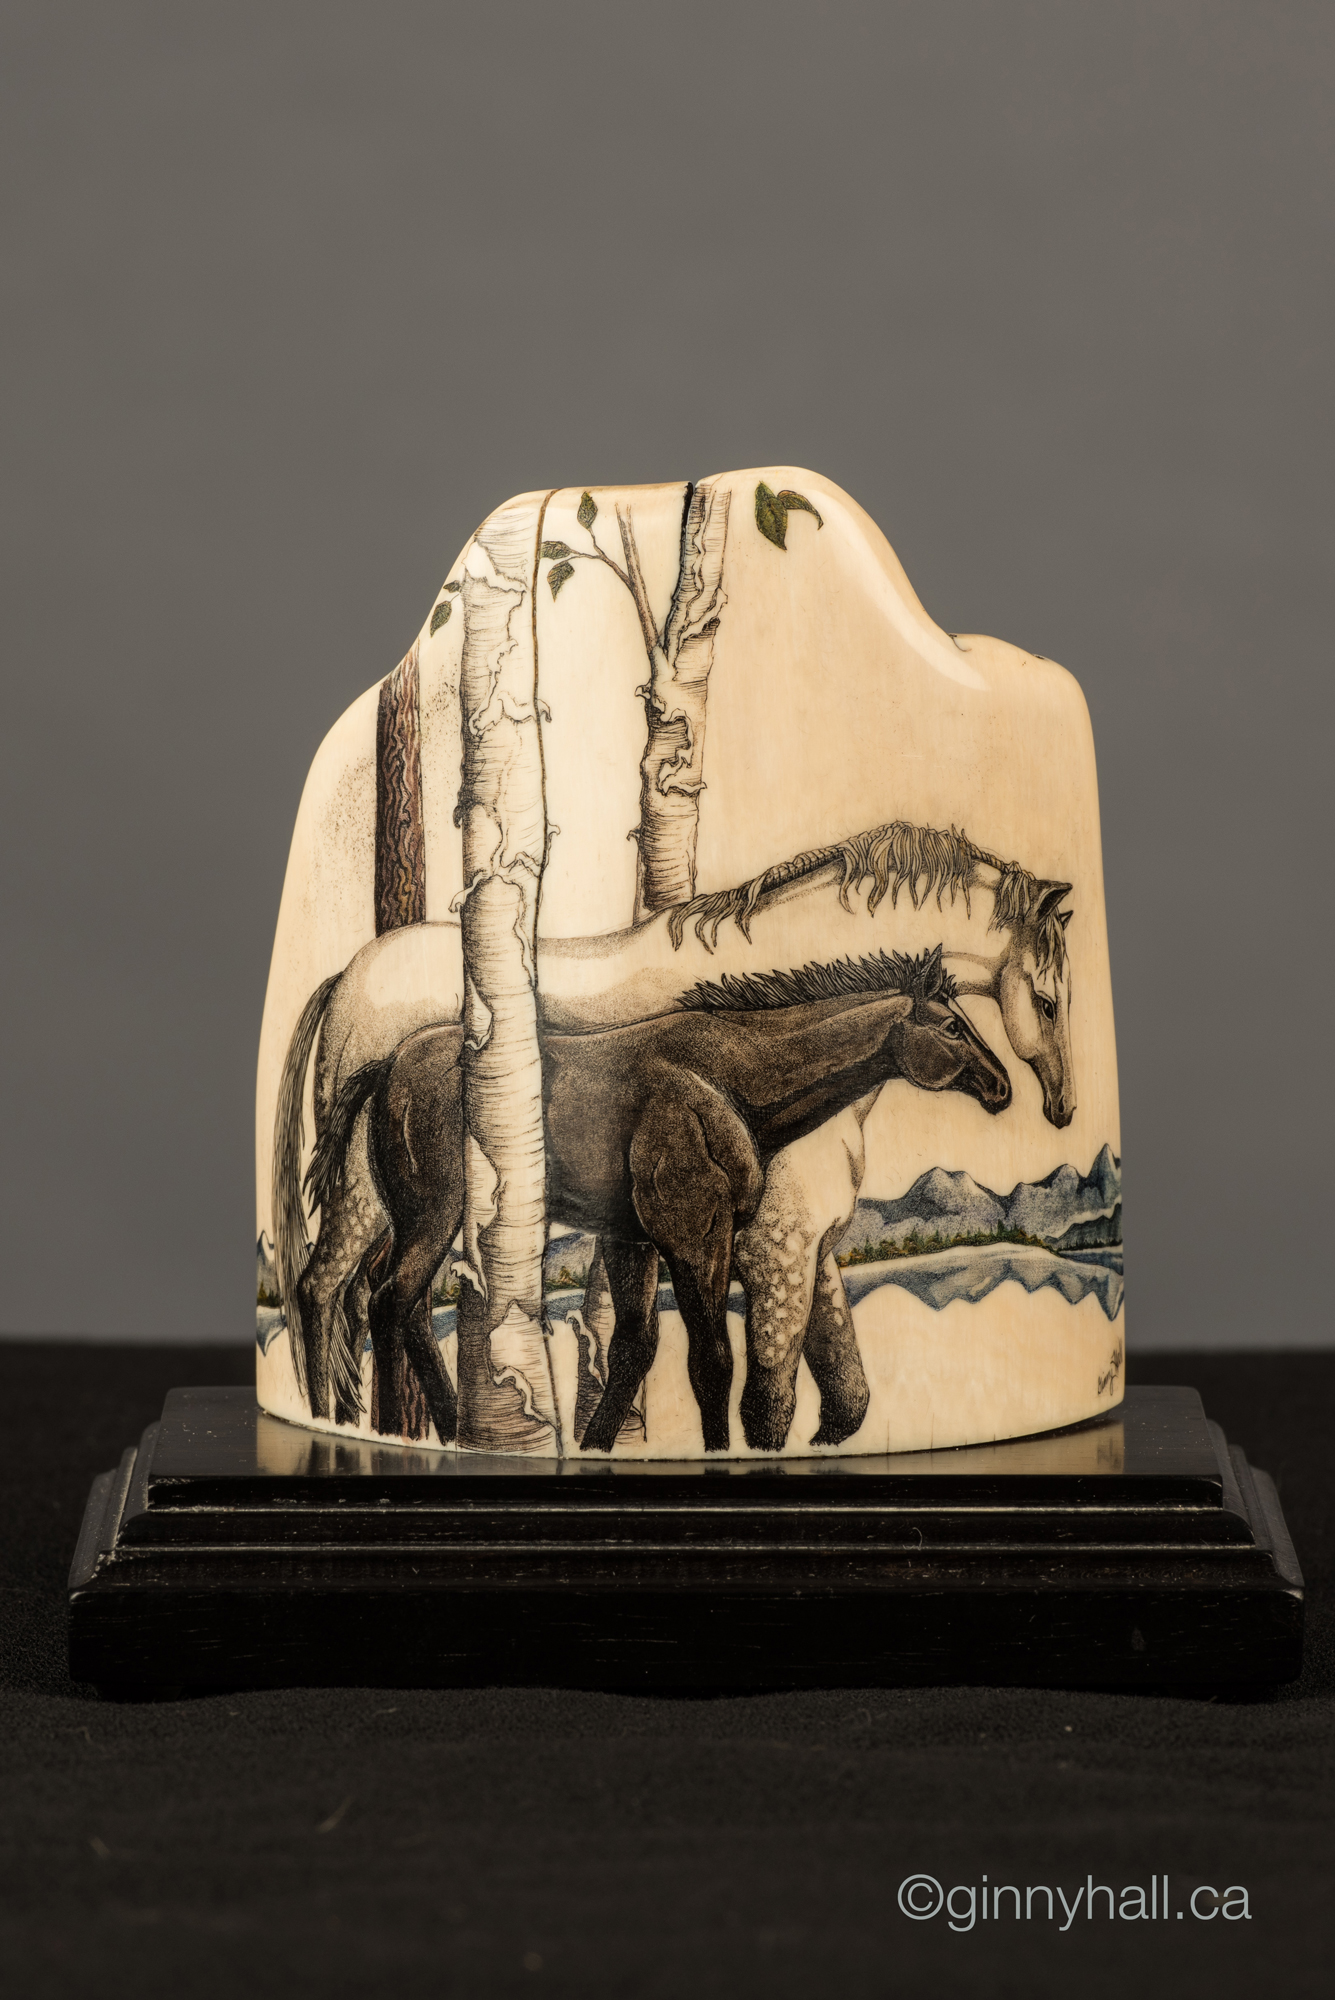 A scrimshaw peice by Ginny Hall depicting horses.